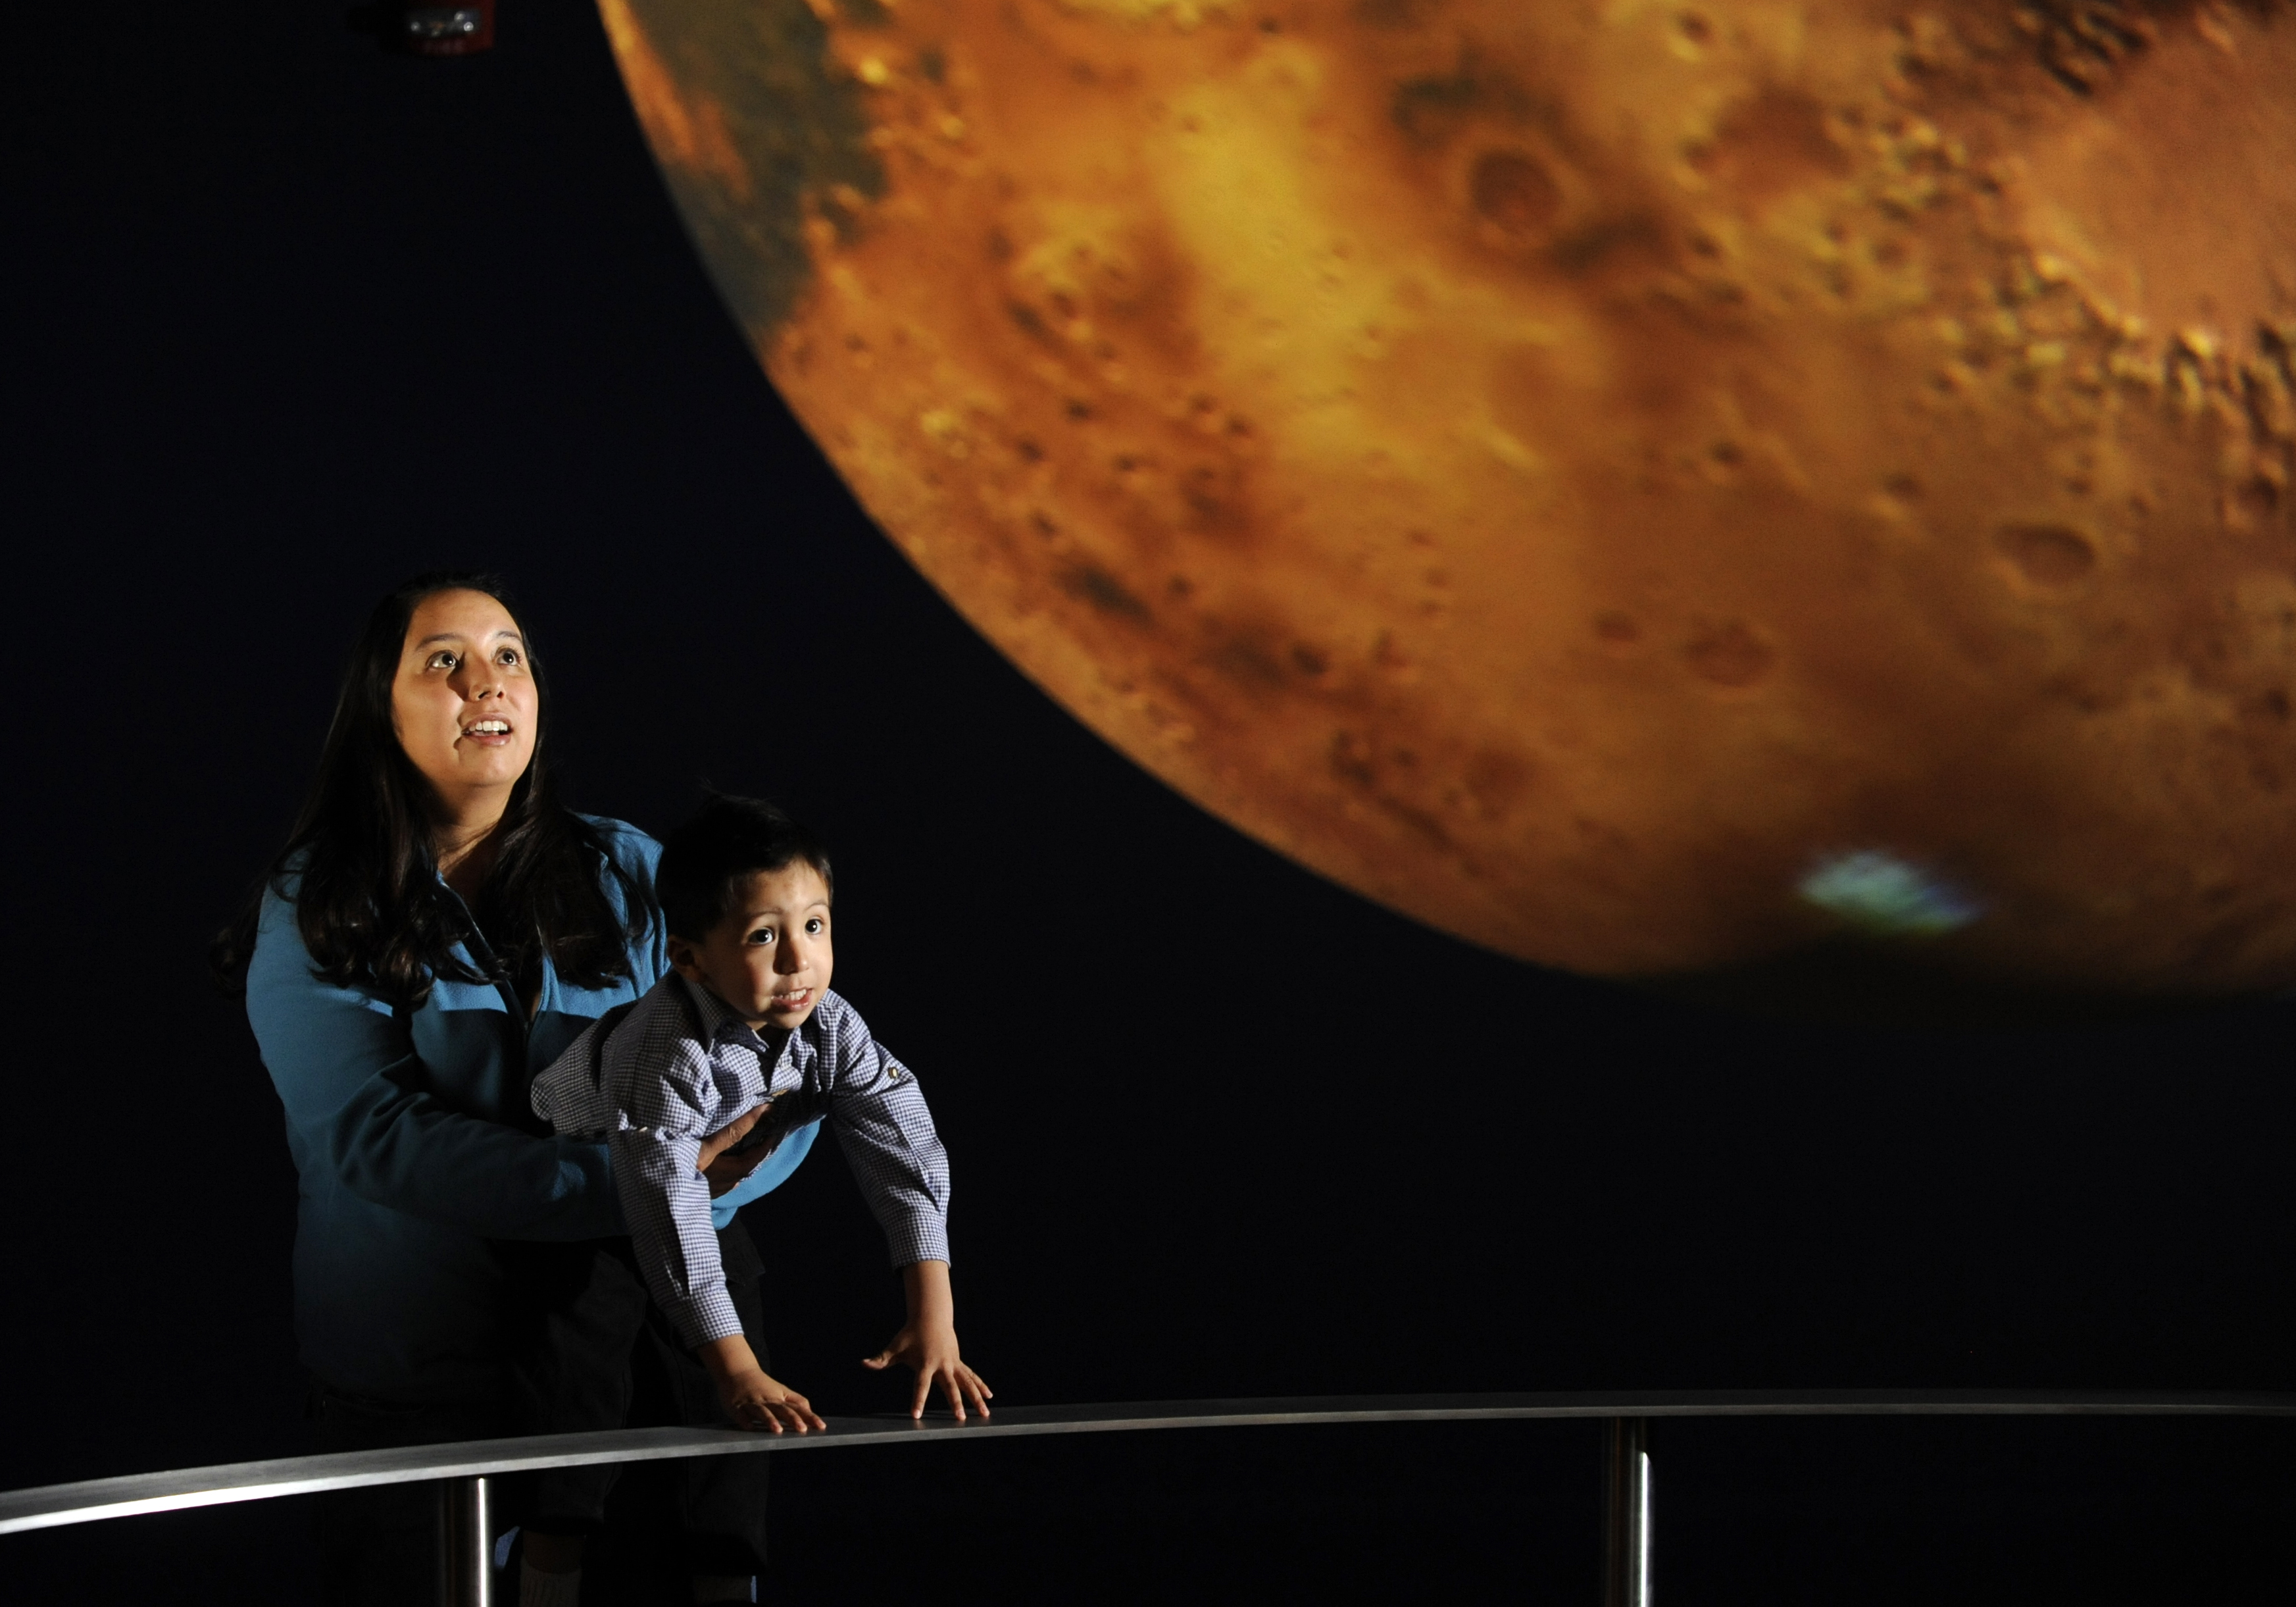 A woman holds a child up over the railing as they look at Science On a Sphere displaying imagery of Mars